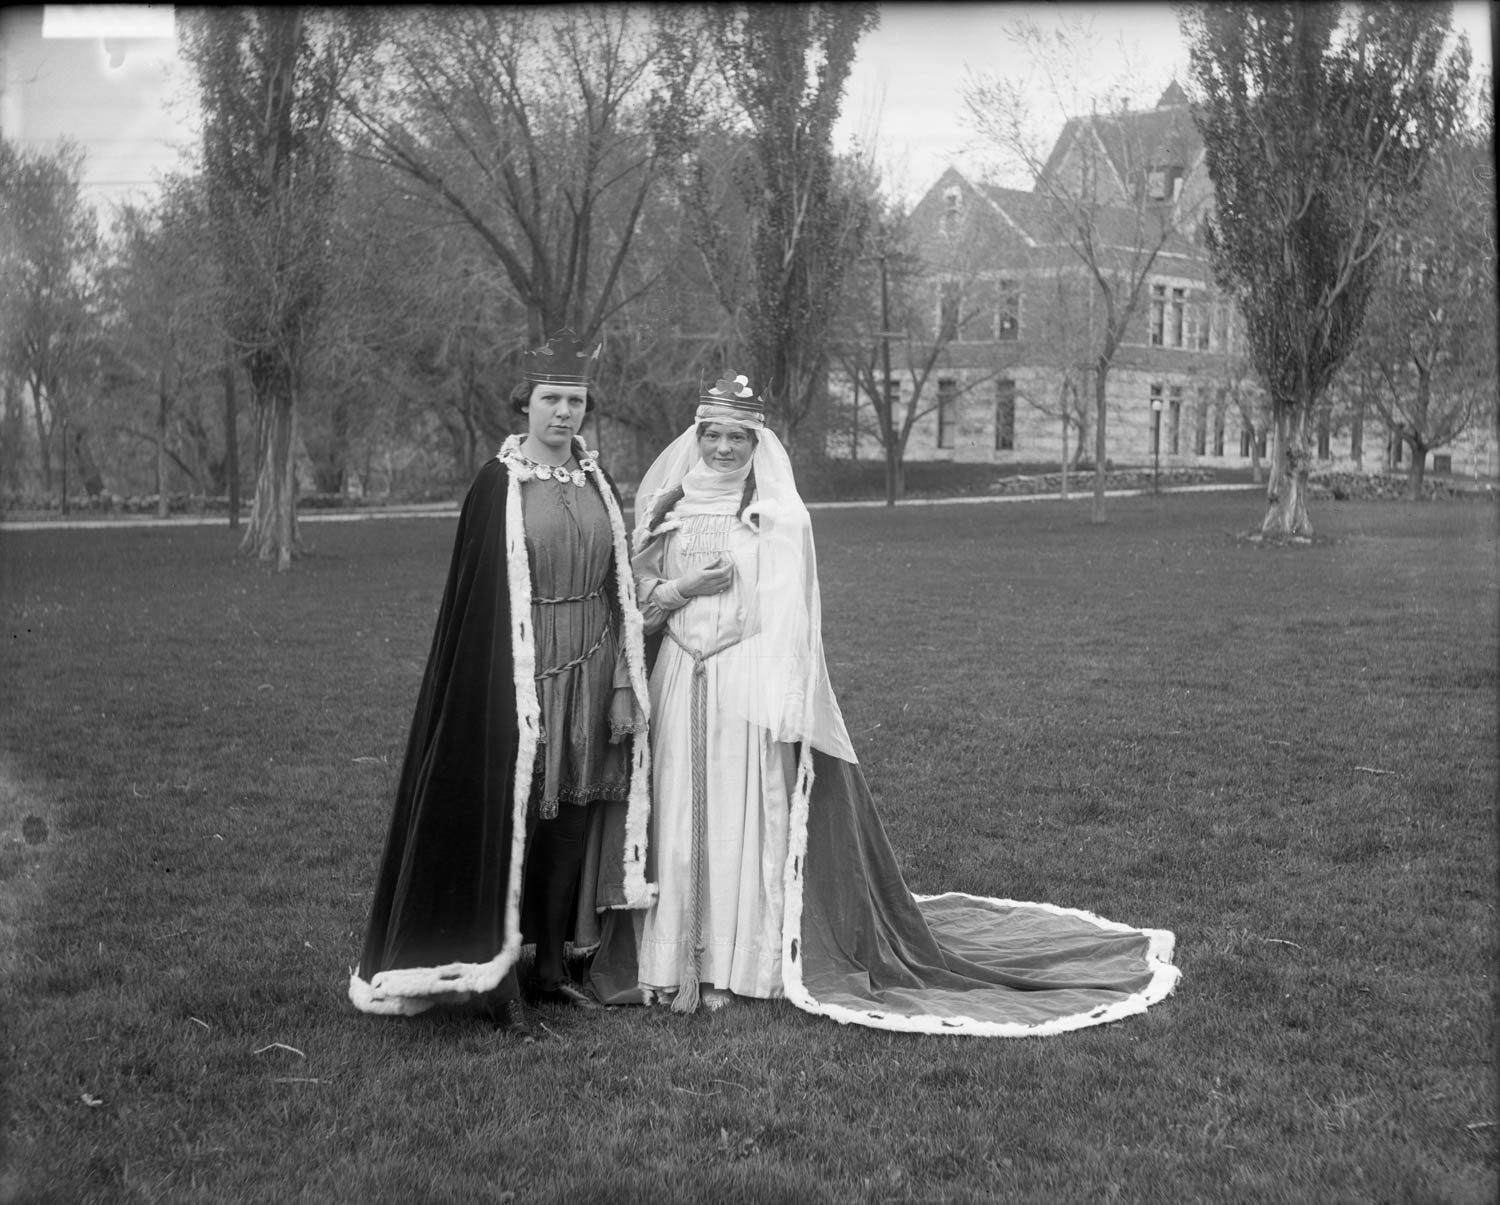 Two women dressed as a king and queen in a vintage Halloween photograph.